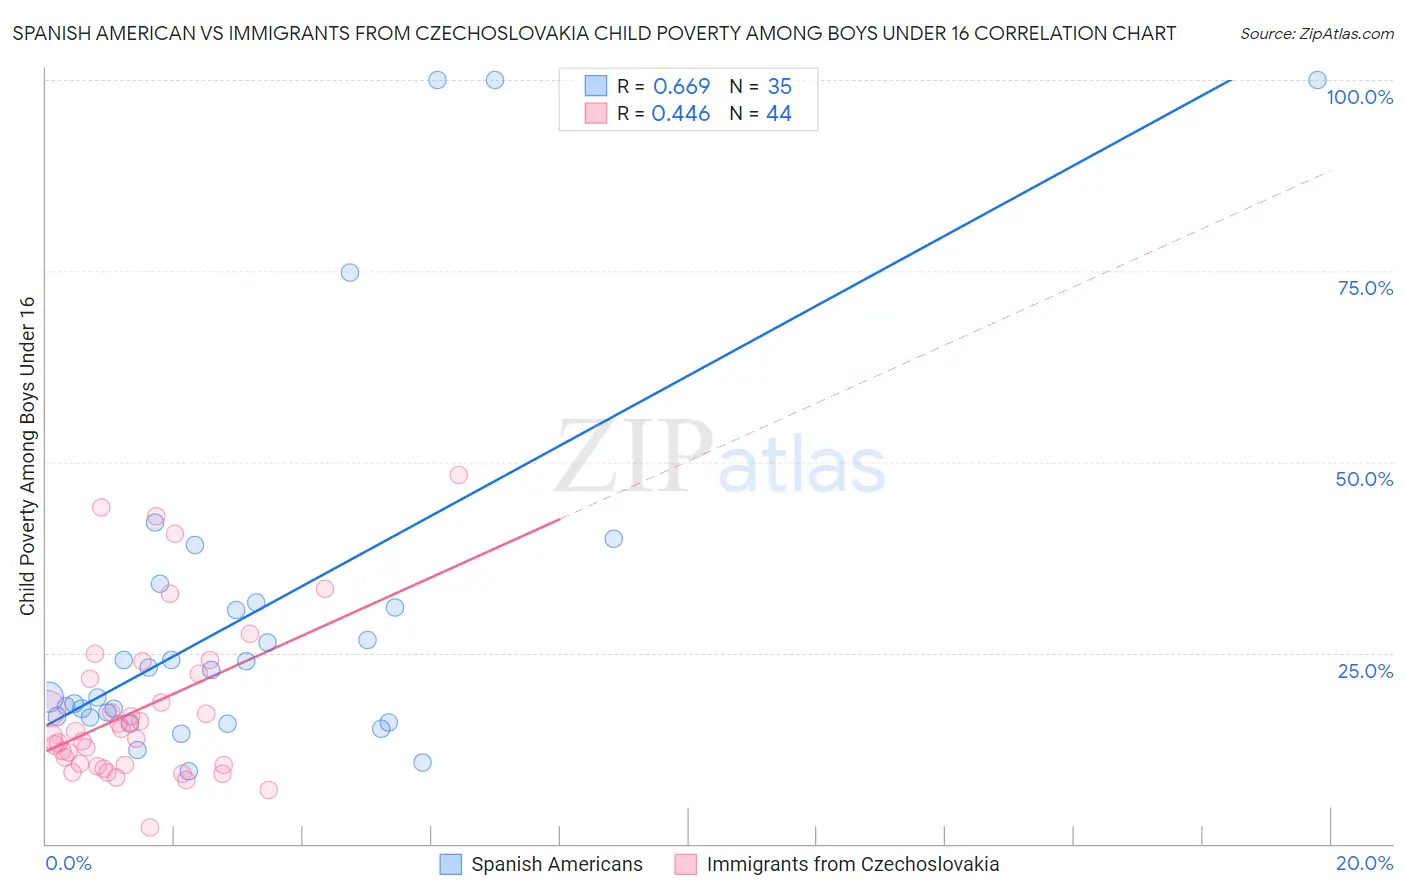 Spanish American vs Immigrants from Czechoslovakia Child Poverty Among Boys Under 16